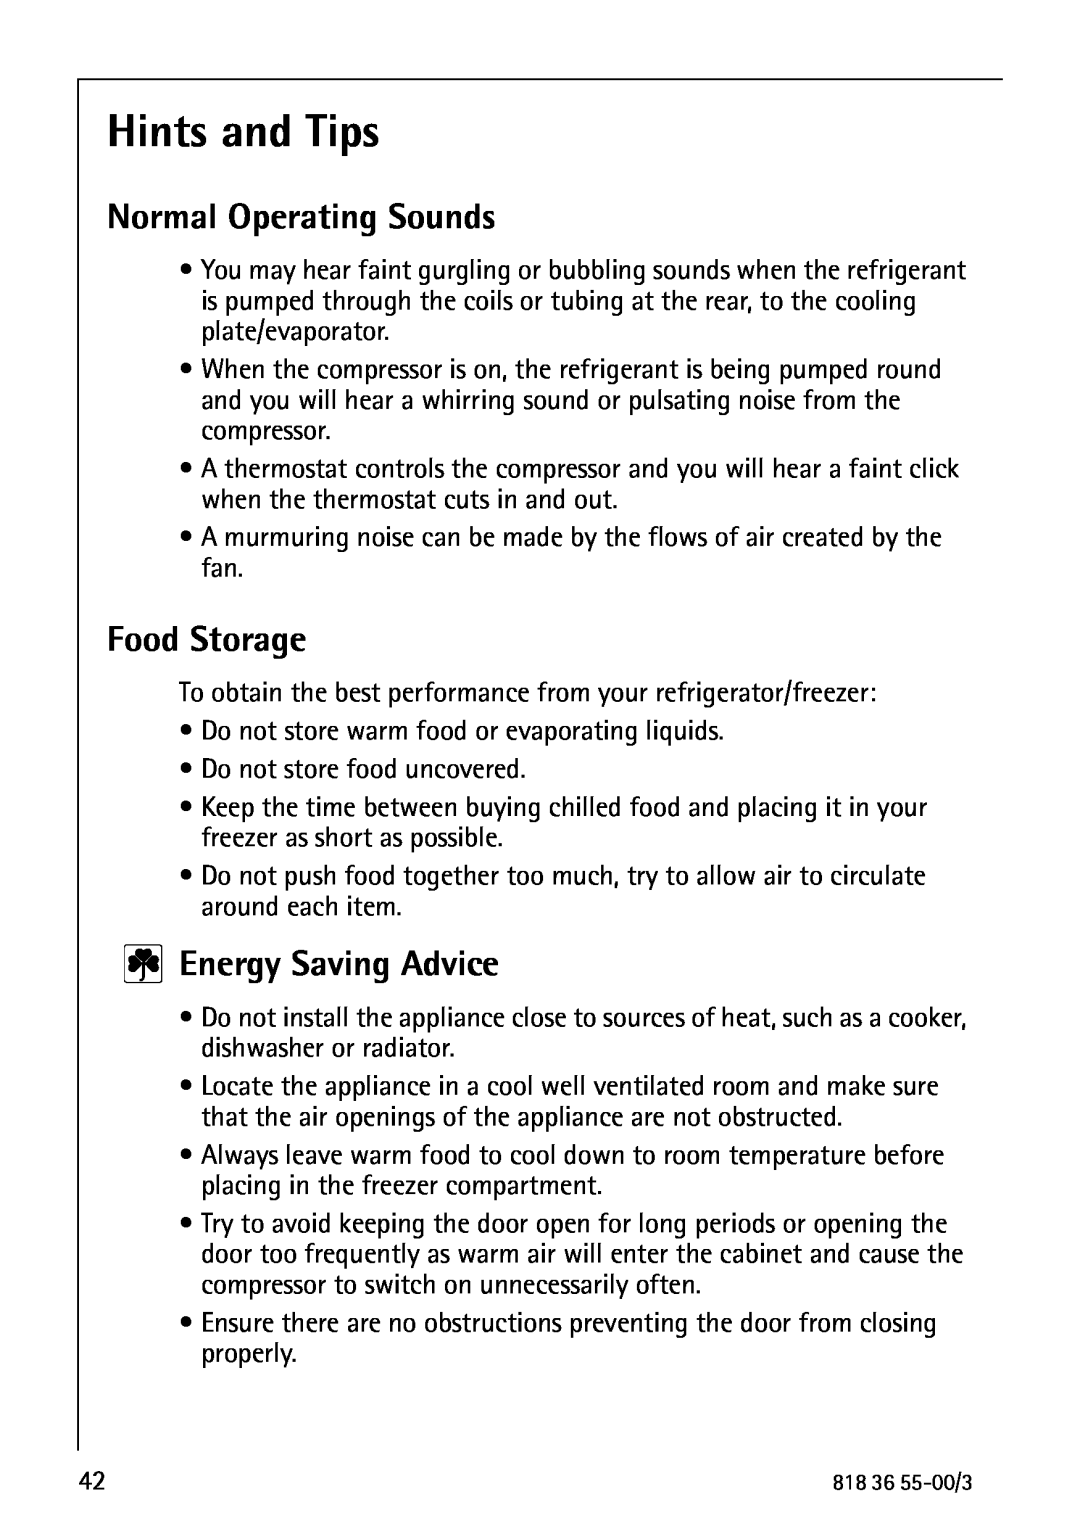 AEG 86378-KG operating instructions Hints and Tips, Normal Operating Sounds, Food Storage, Energy Saving Advice 